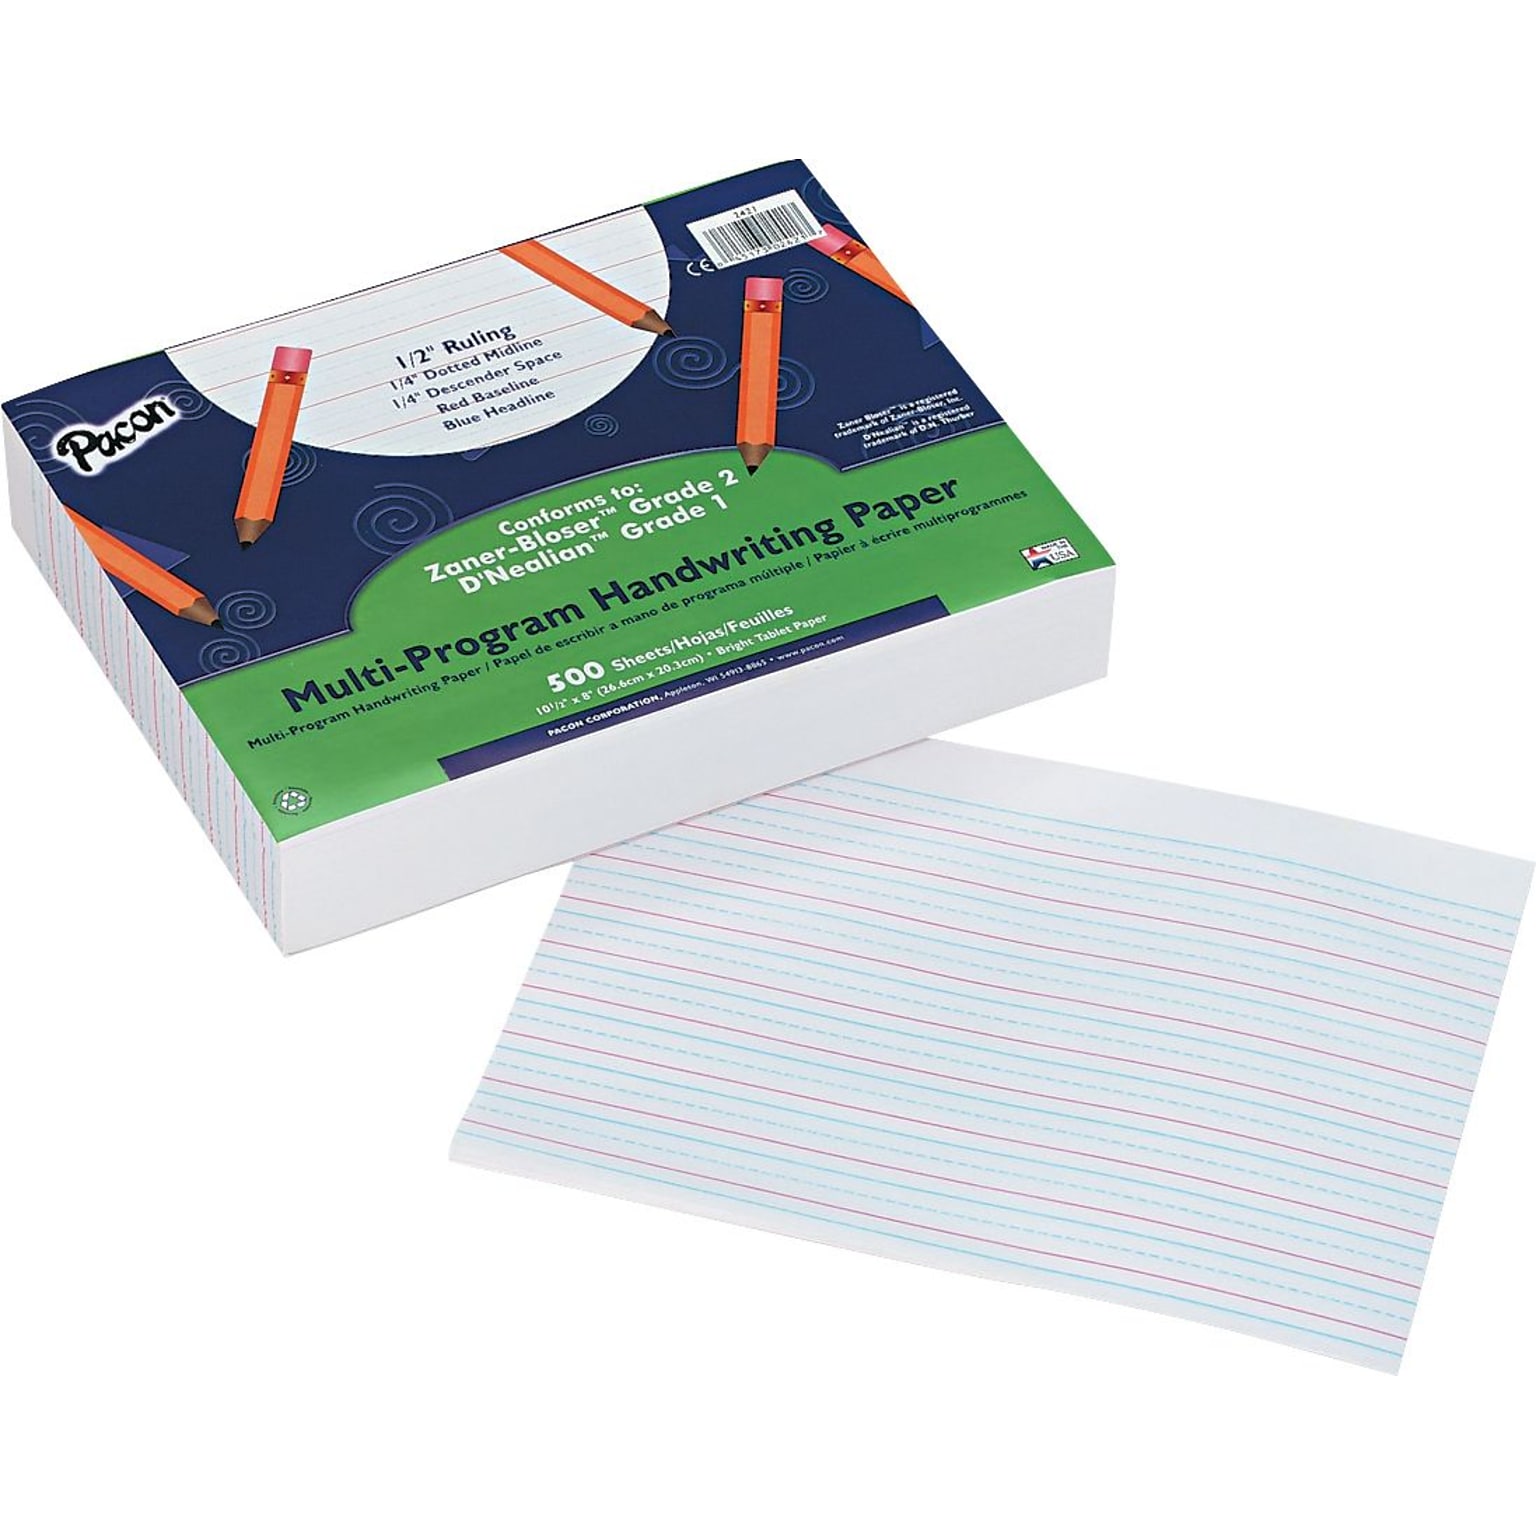 Pacon DNealian/Zaner-Bloser Multi-Program Handwriting Papers with Skip Space 10-1/2x 8, 1/2 Ruling, White, 500 Sheets/Pk